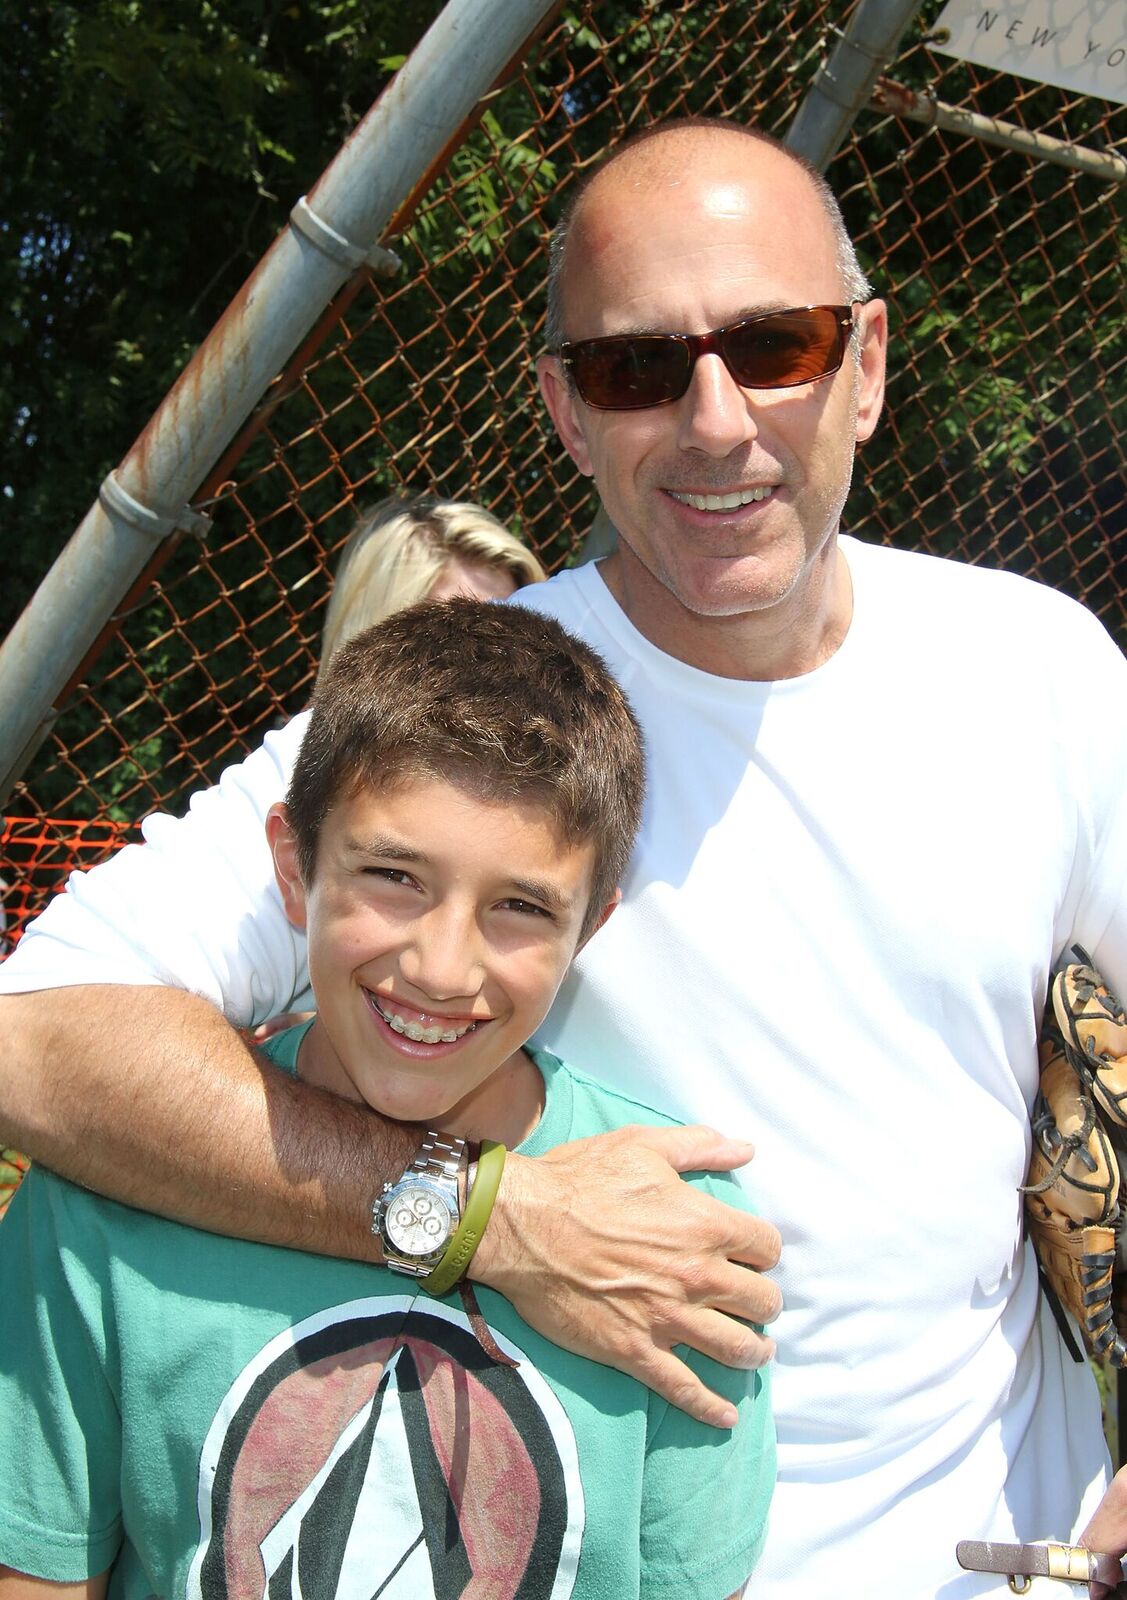 Matt Lauer and son Jack at the 65th Anniversary Artists & Writers Celebrity Softball Game on August 17, 2013, in East Hampton, New York | Photo: Sonia Moskowitz/Getty Images